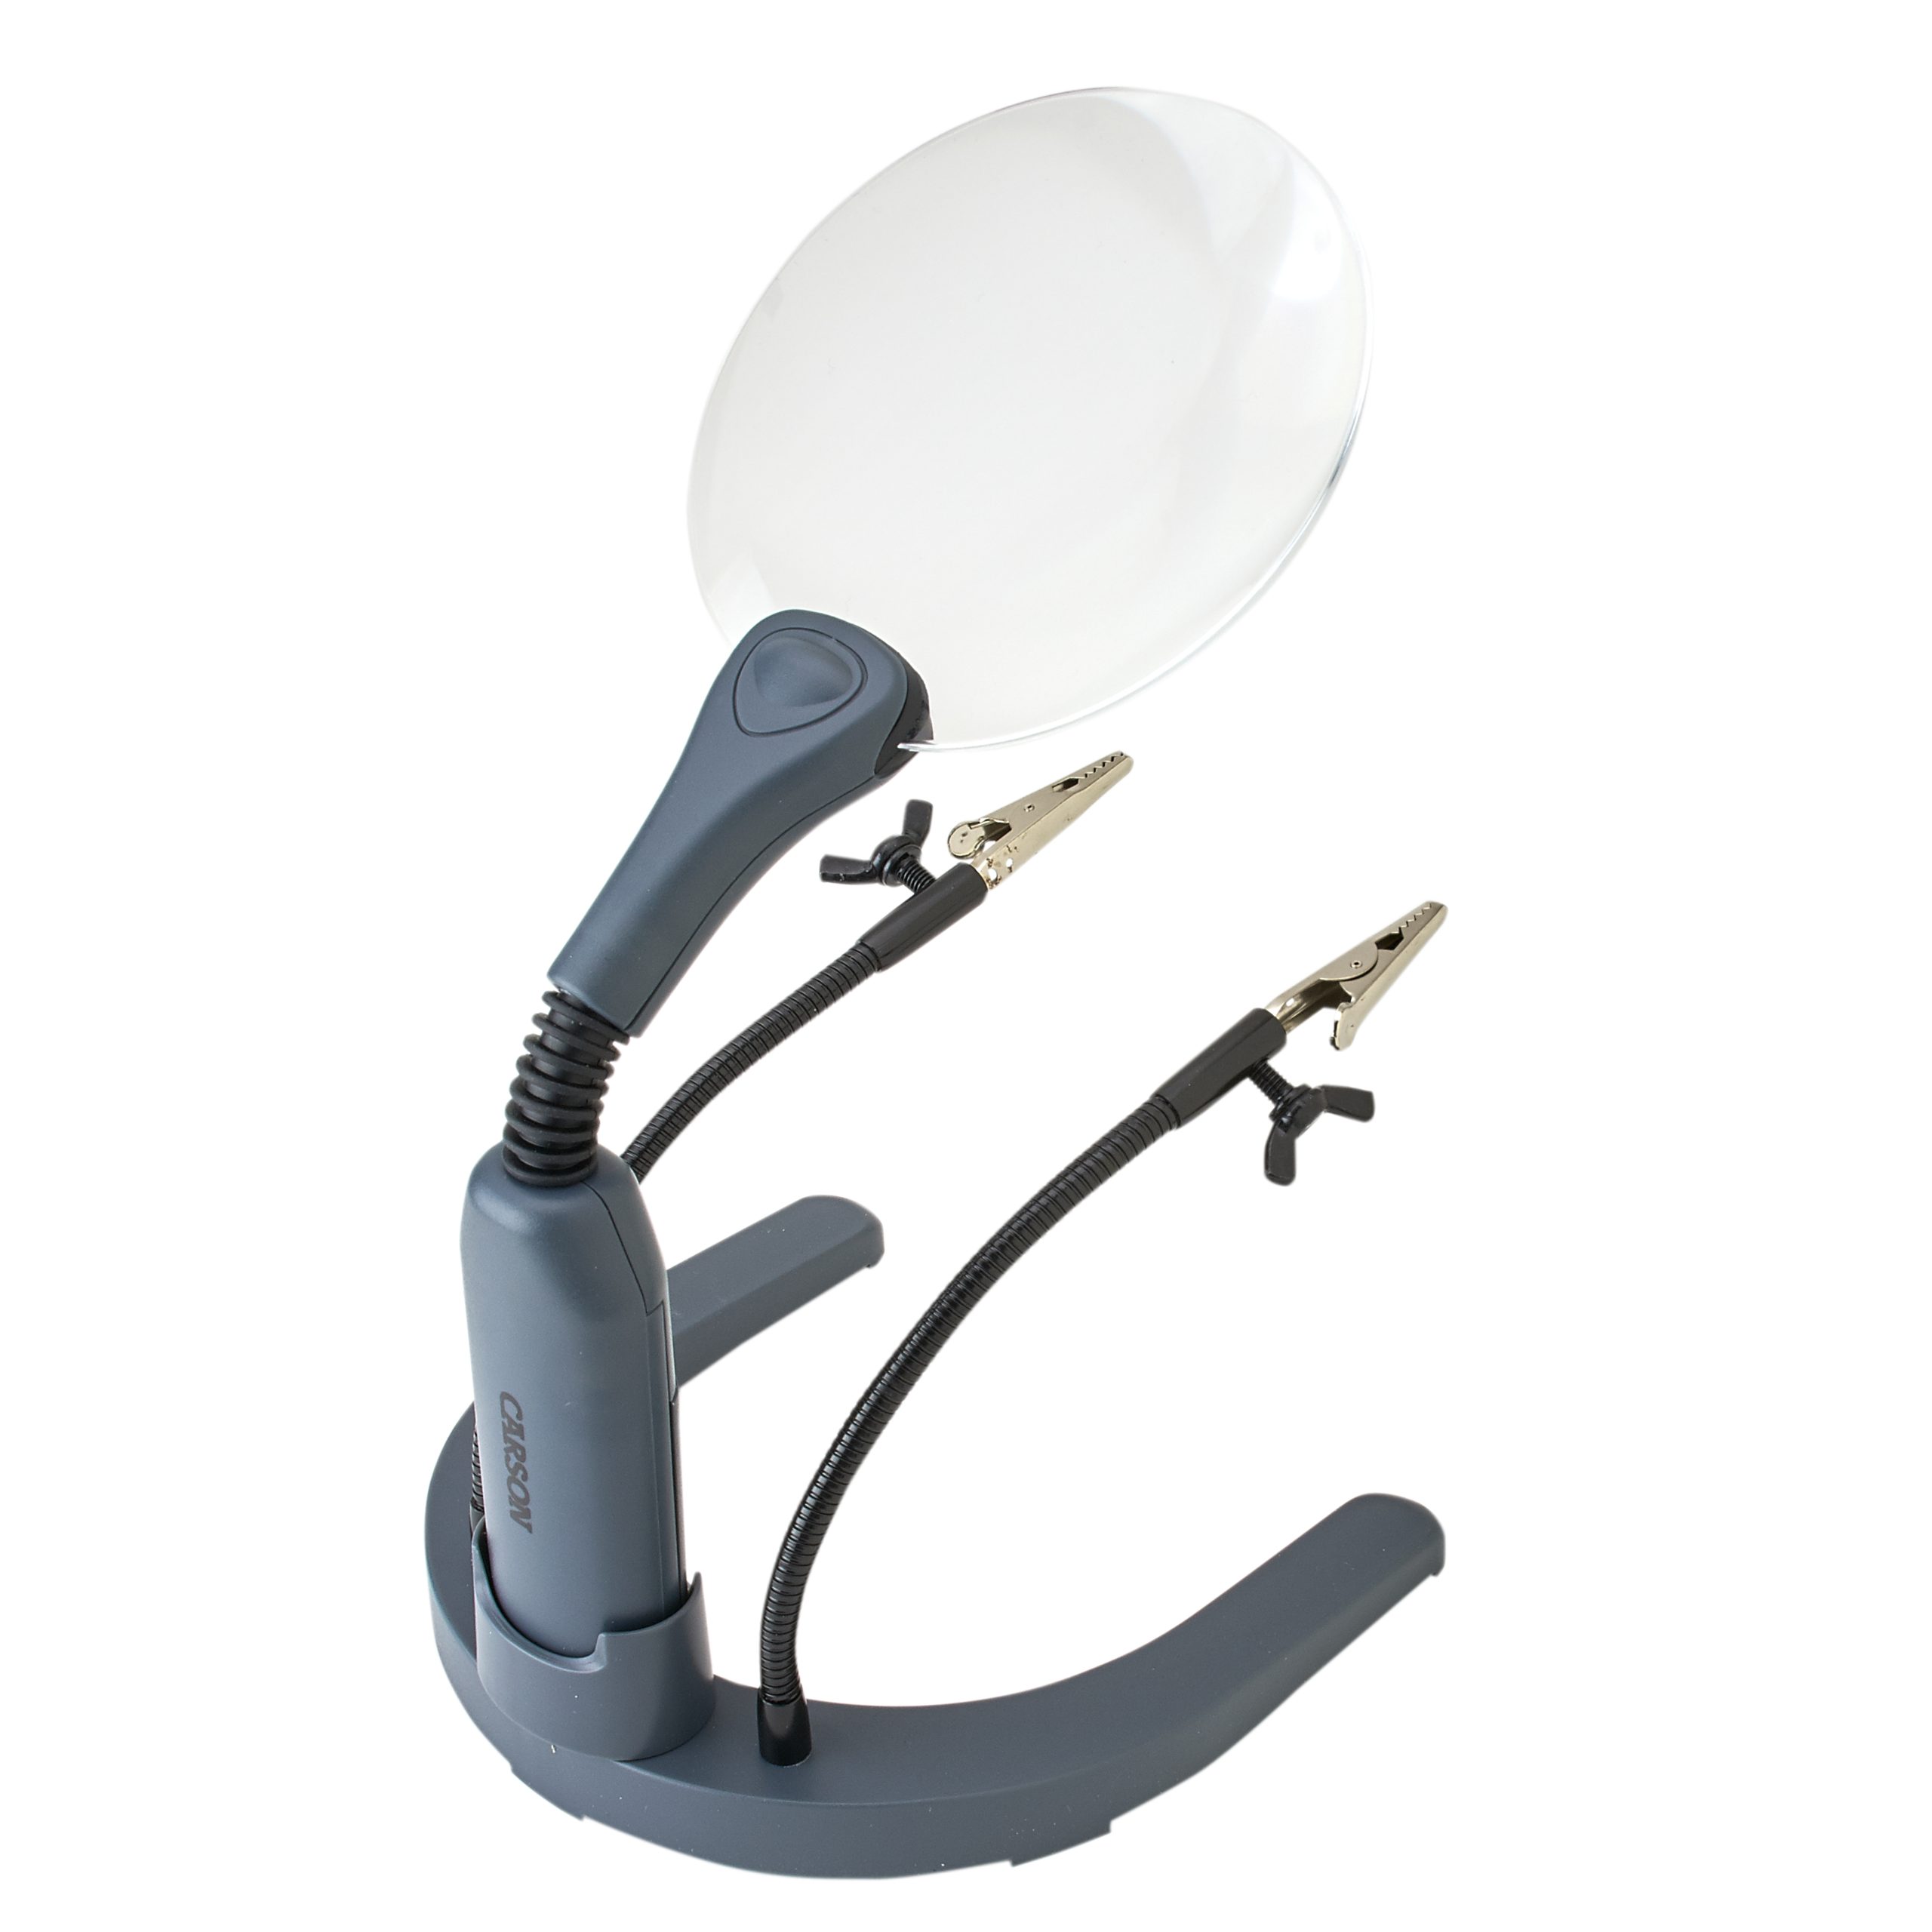 Carson Optical Magnishine Hands Free LED Lighted 2X Magnifier : around the  neck magnifier for arthritis